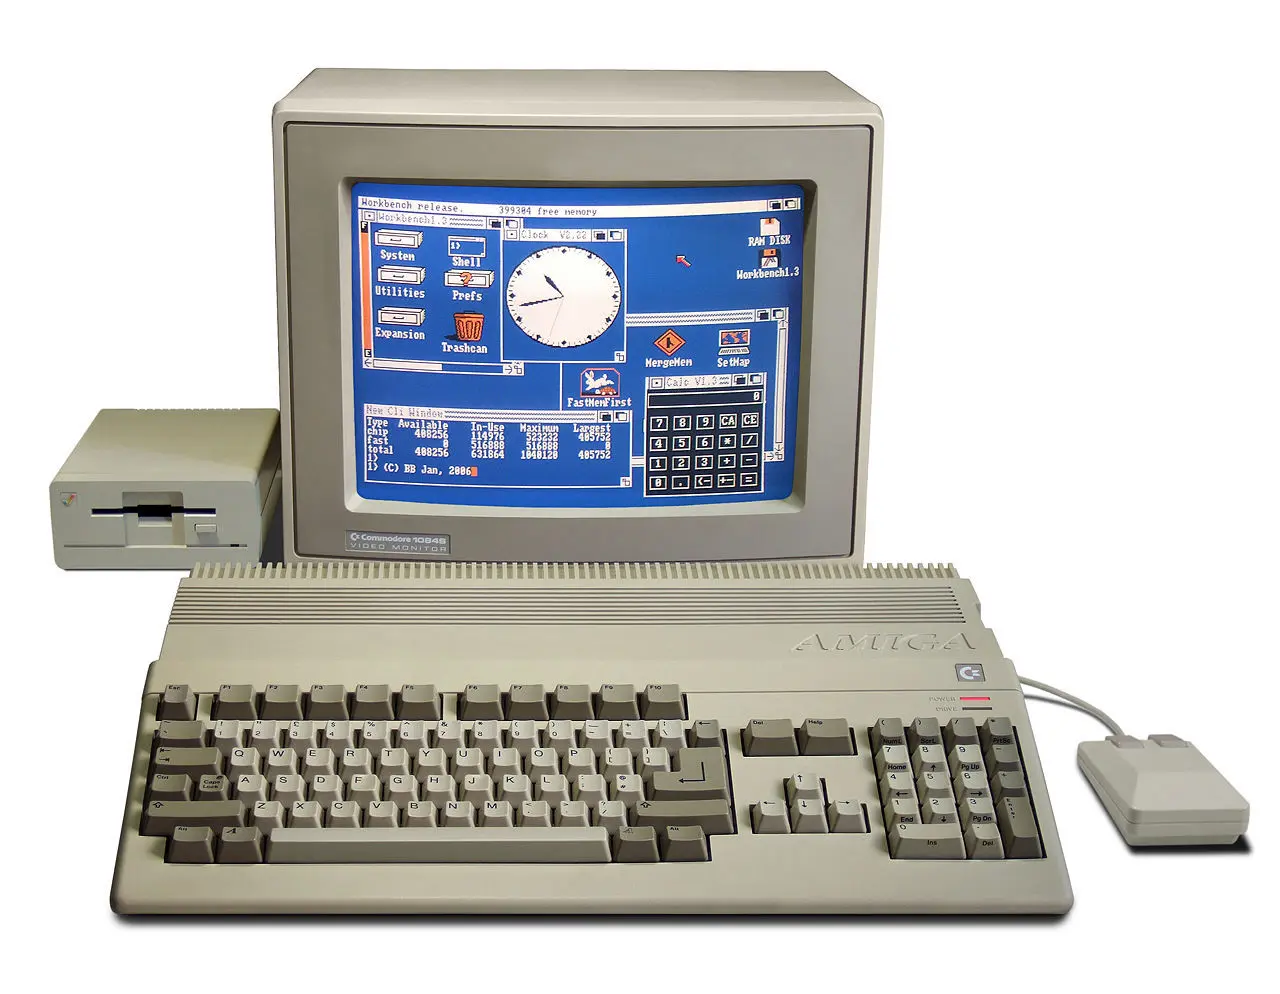 Learn More about the Amiga 500